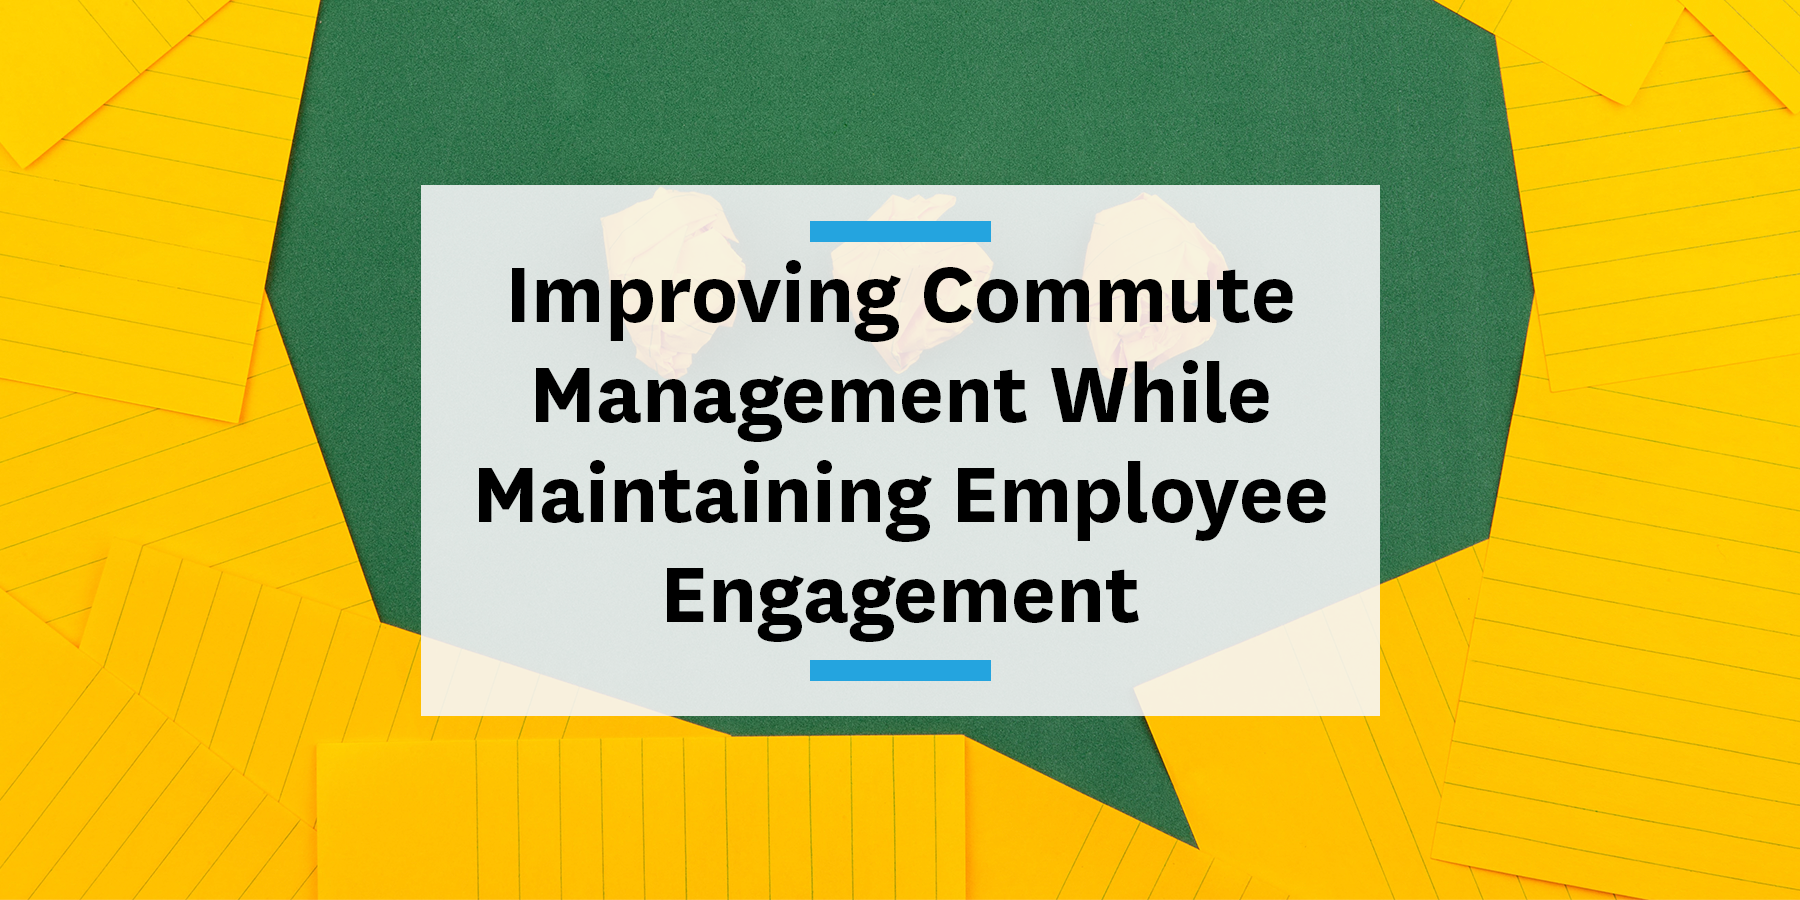 Feature image for commute management and employee engagement